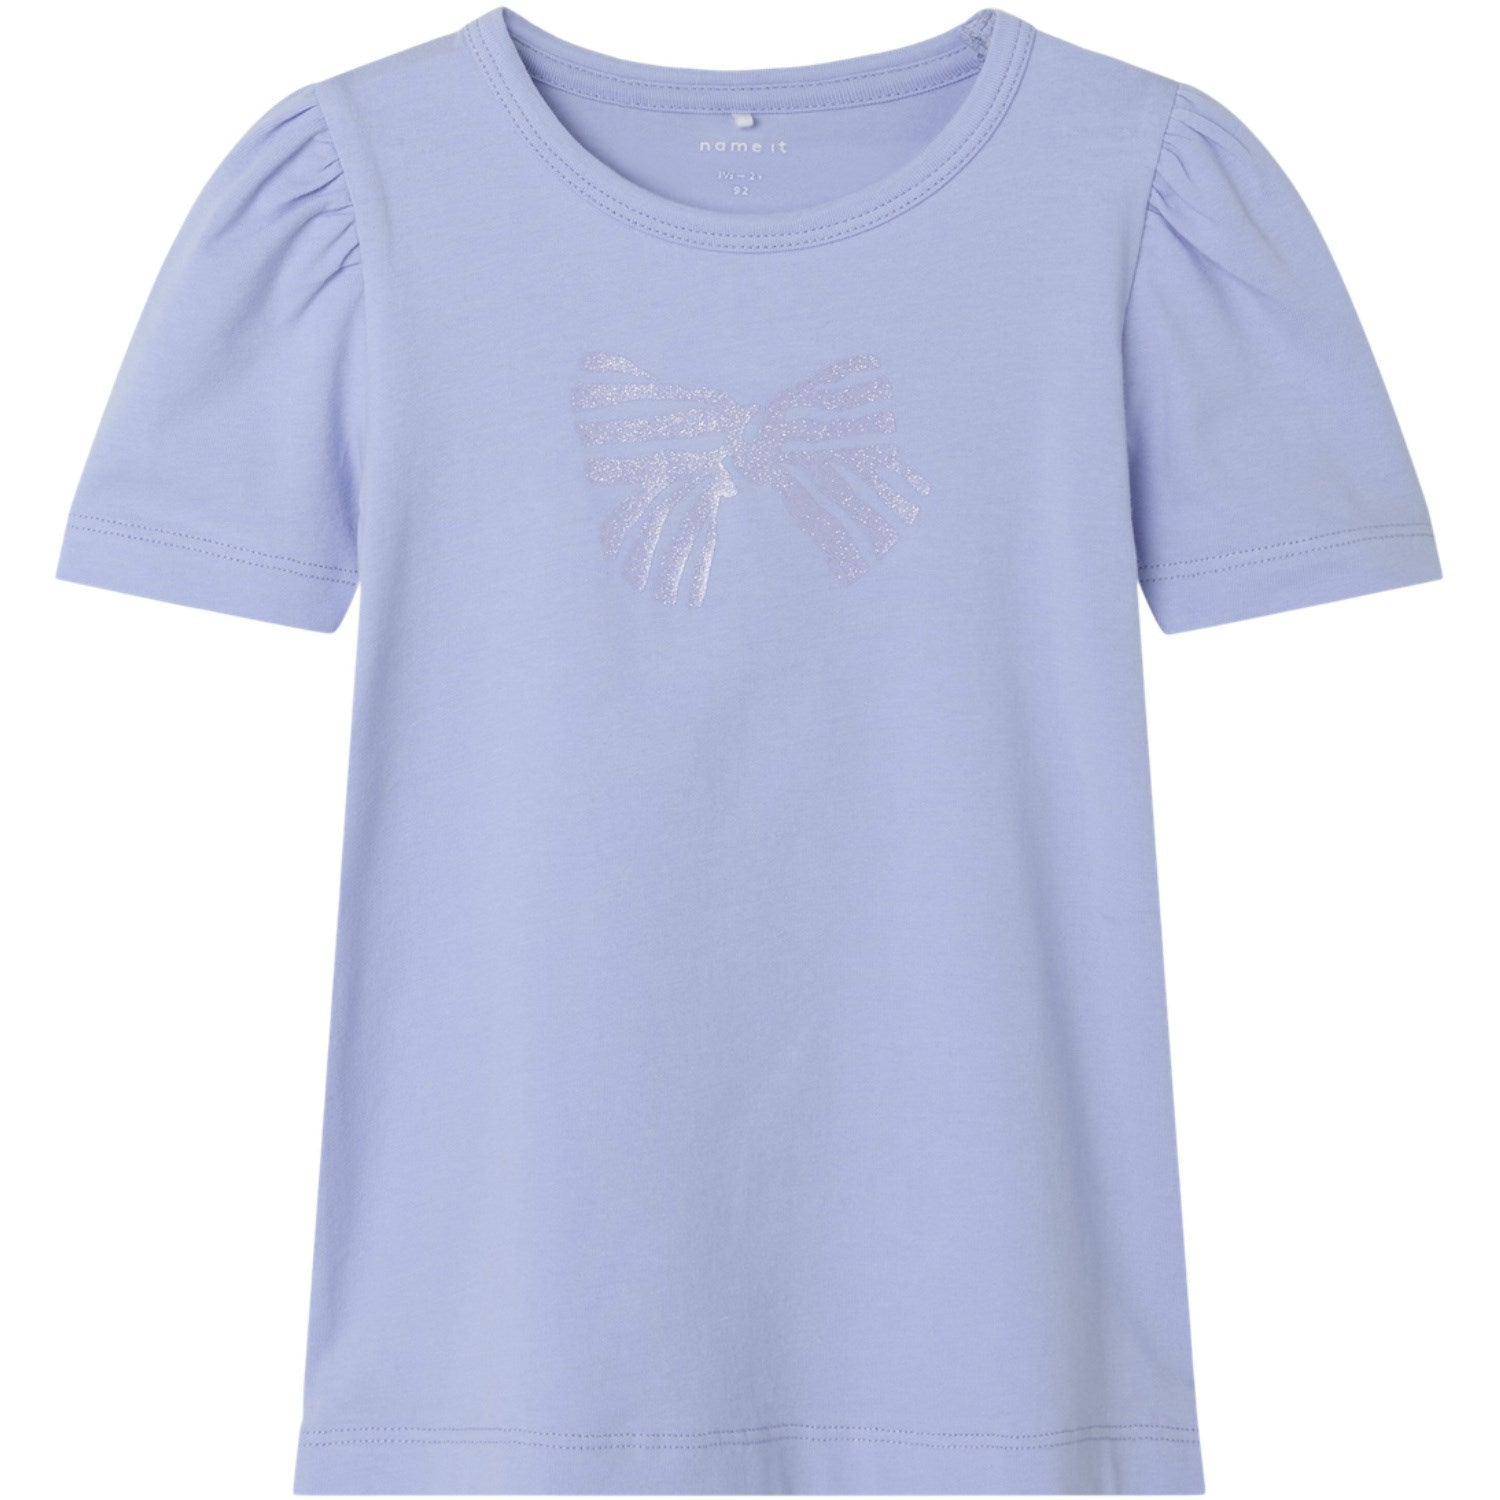 Name It Baby Lavender Janne T-Shirt